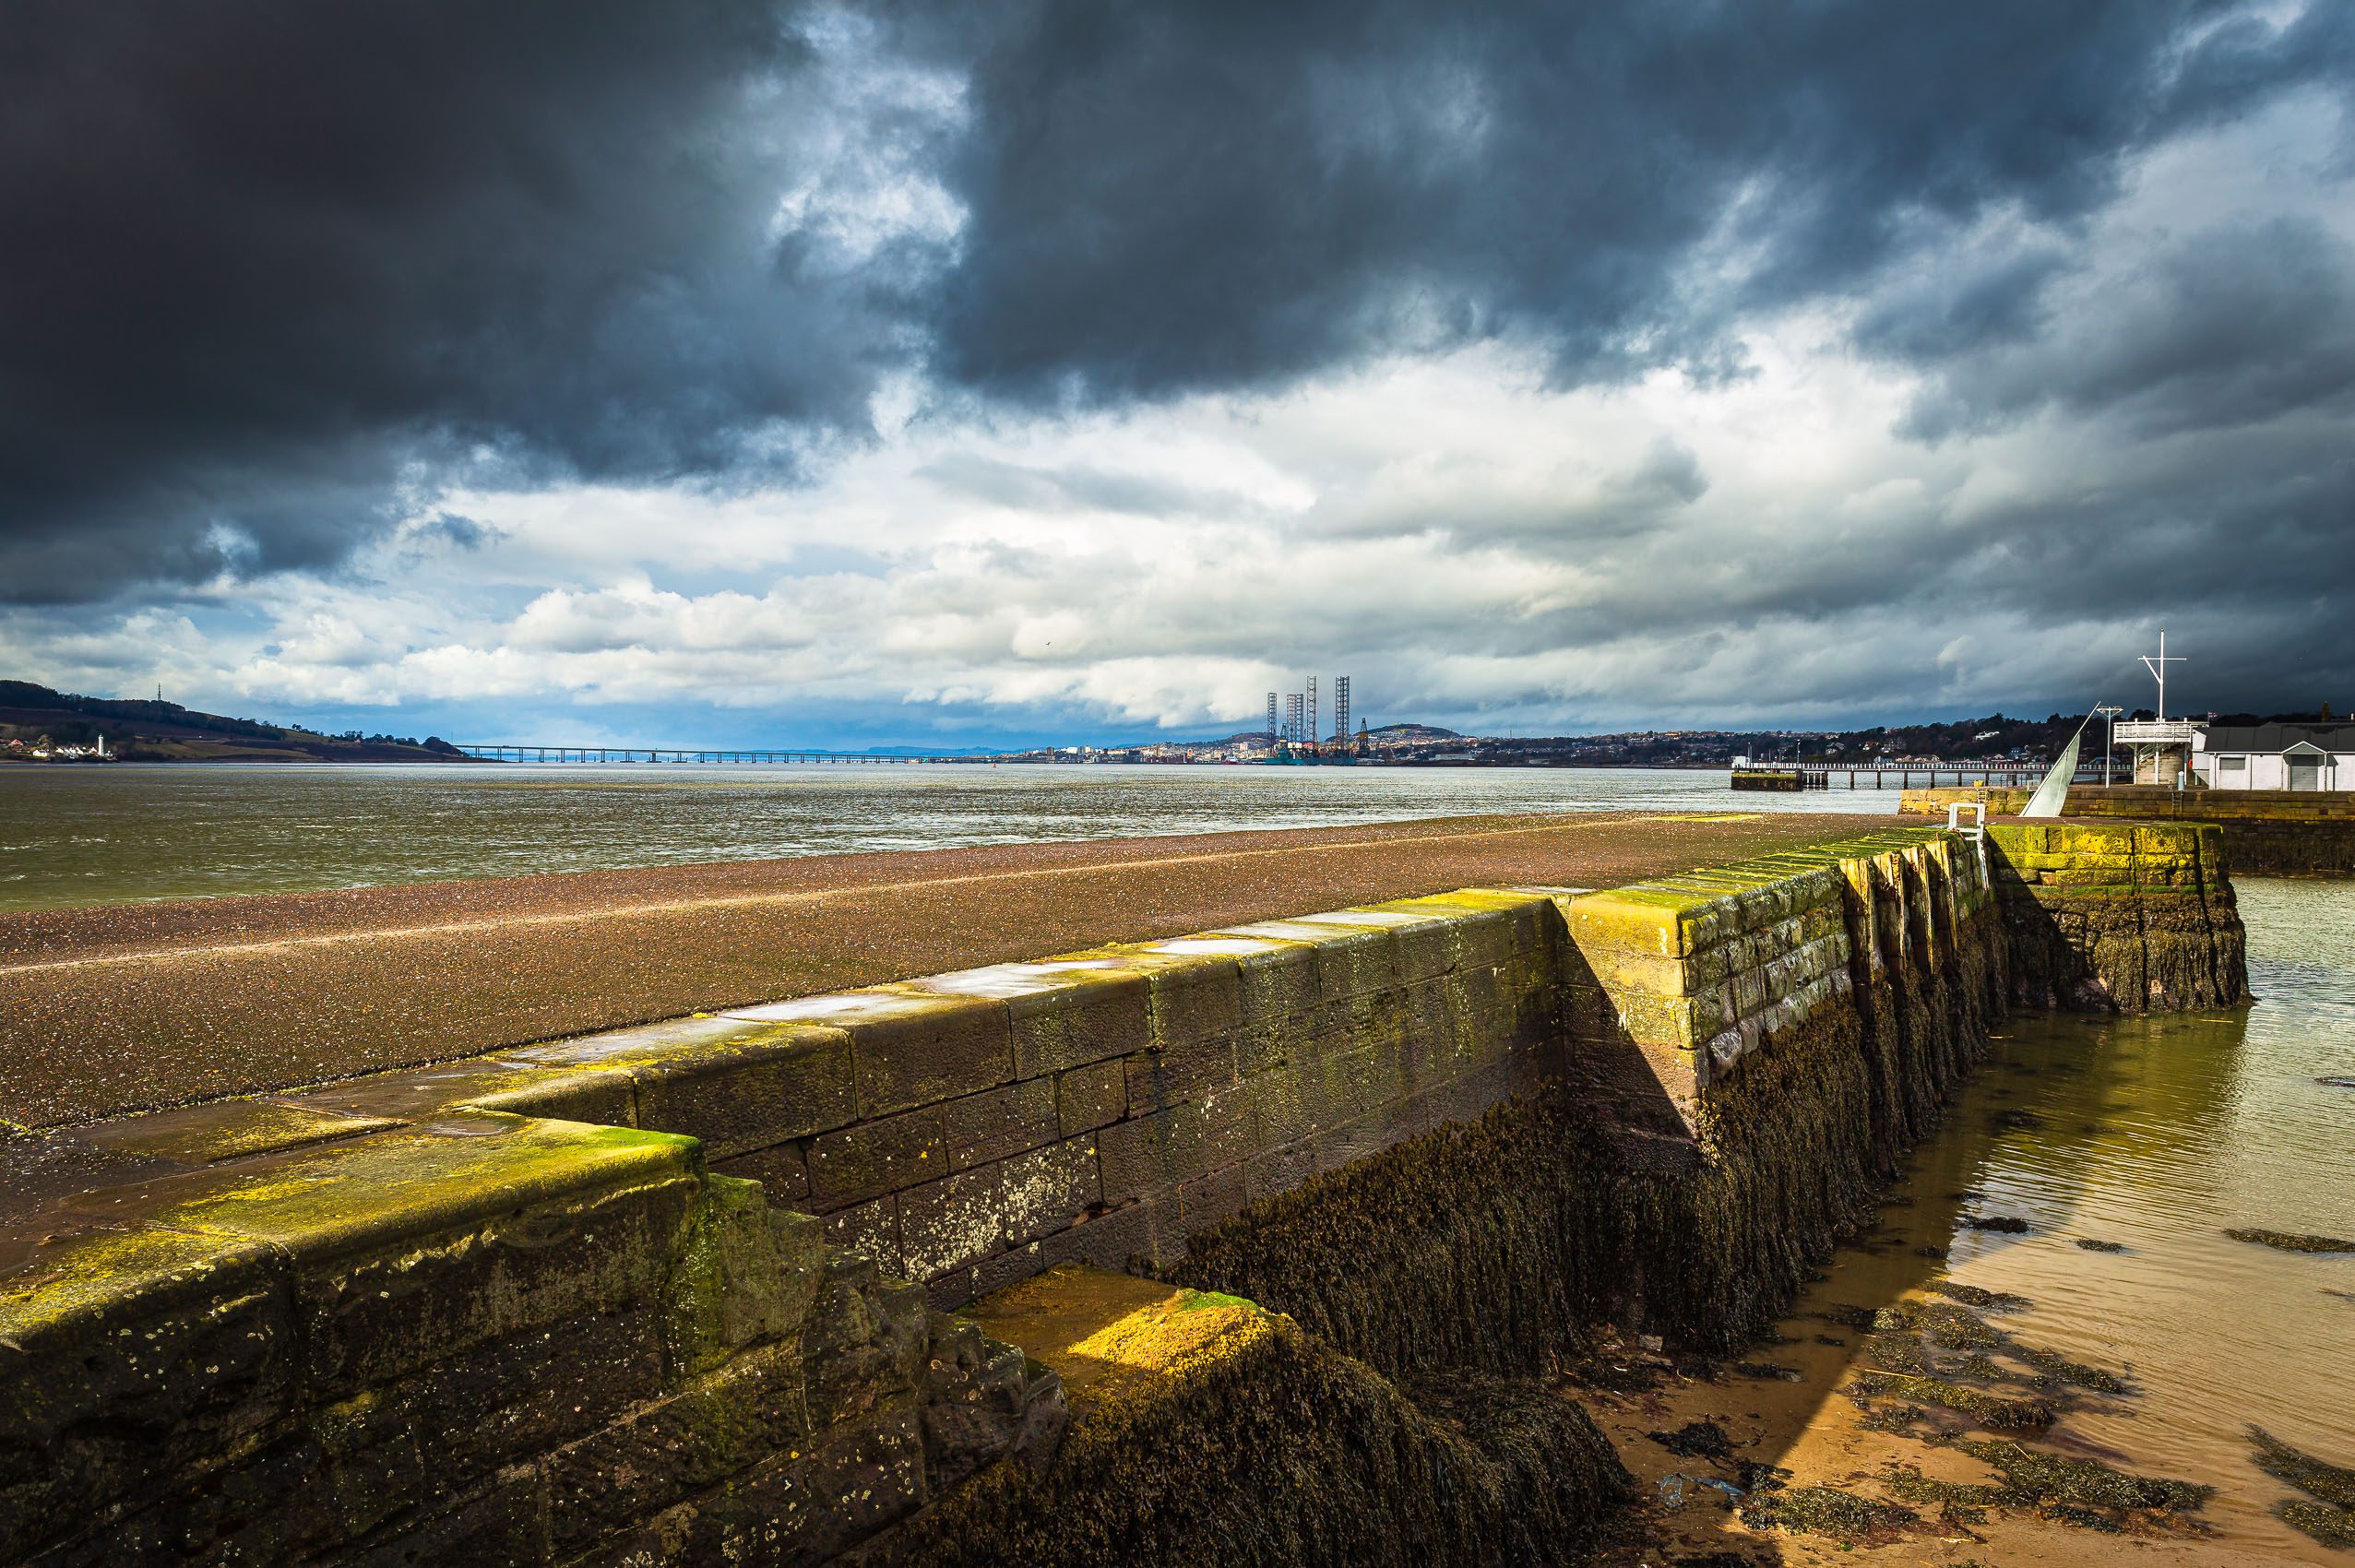 Broughty Ferry Harbour, Dundee, Scotland. DD022